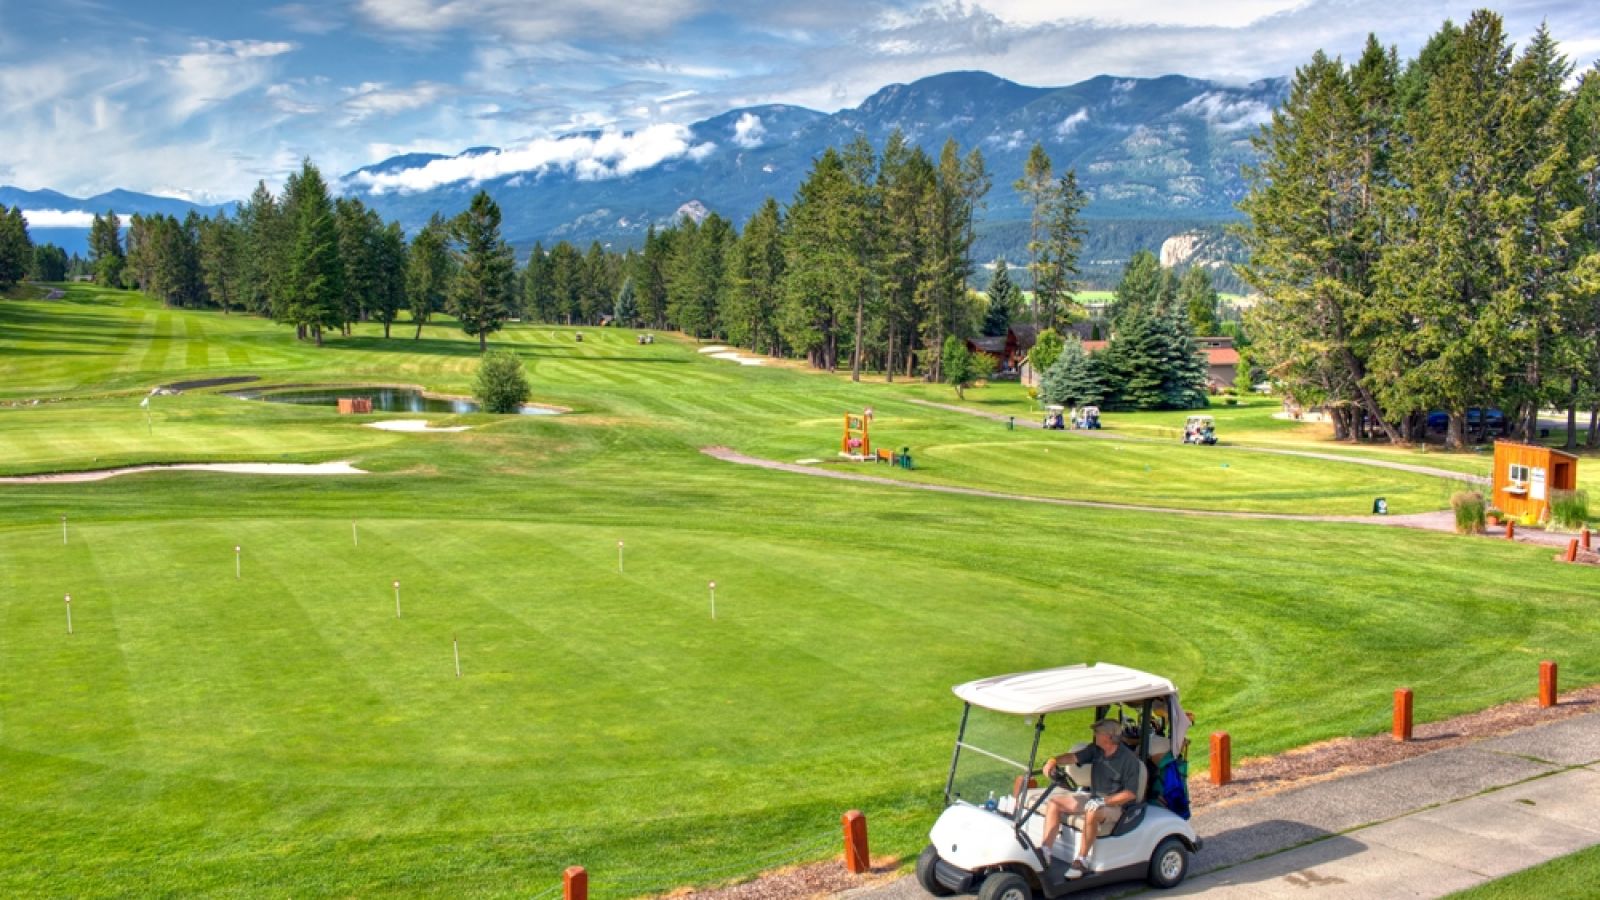 Fairmont Hot Springs Resort - Columbia Valley golf packages